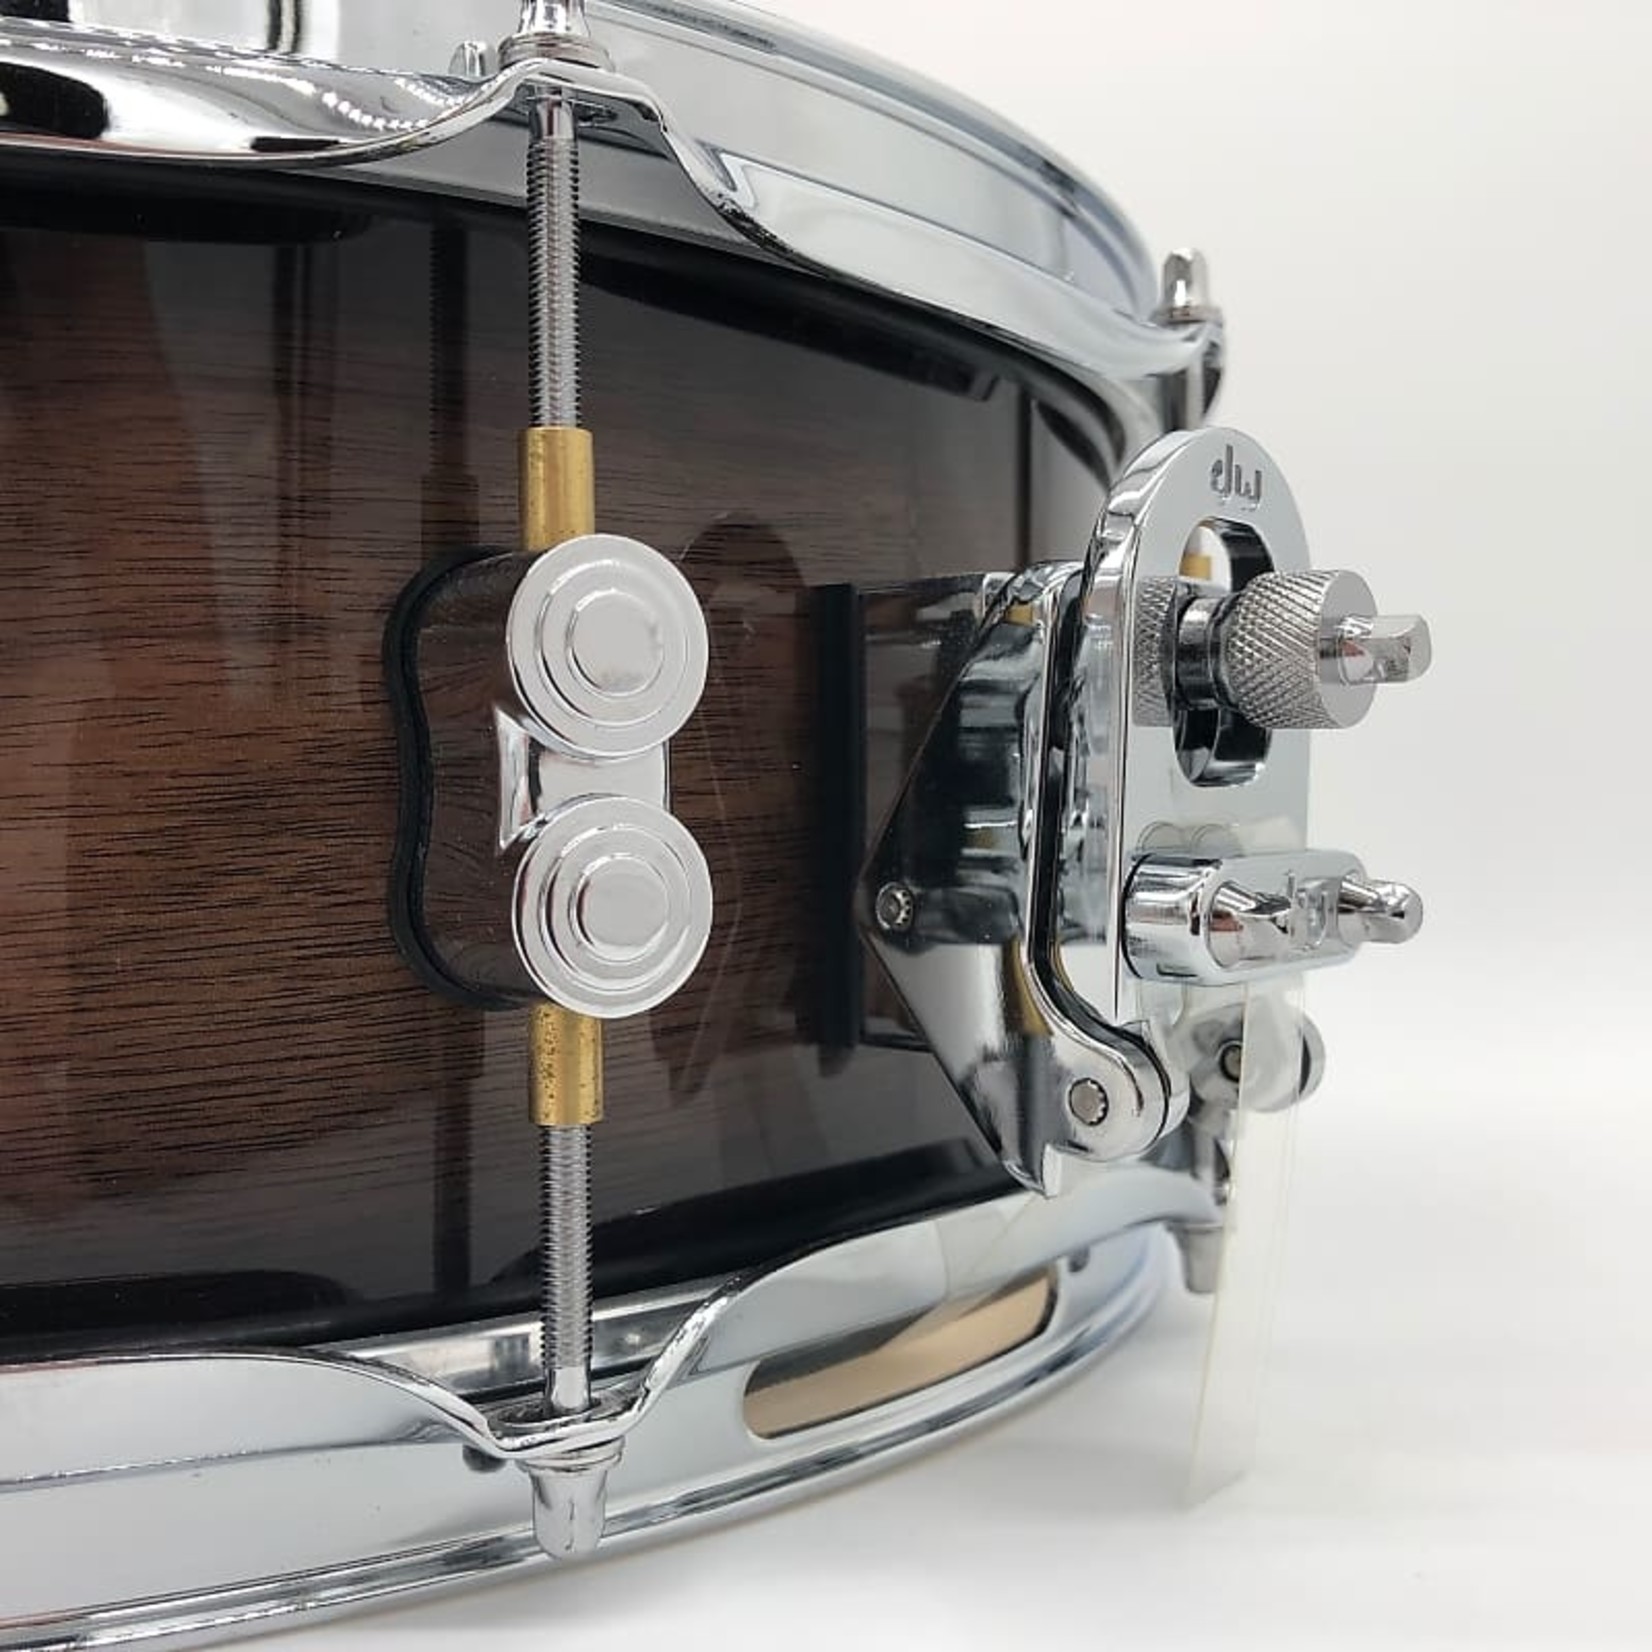 PDP PDP Concept Exotic 5.5x14" Walnut/Charcoal Burst Snare Drum PDCMX5514SSWC